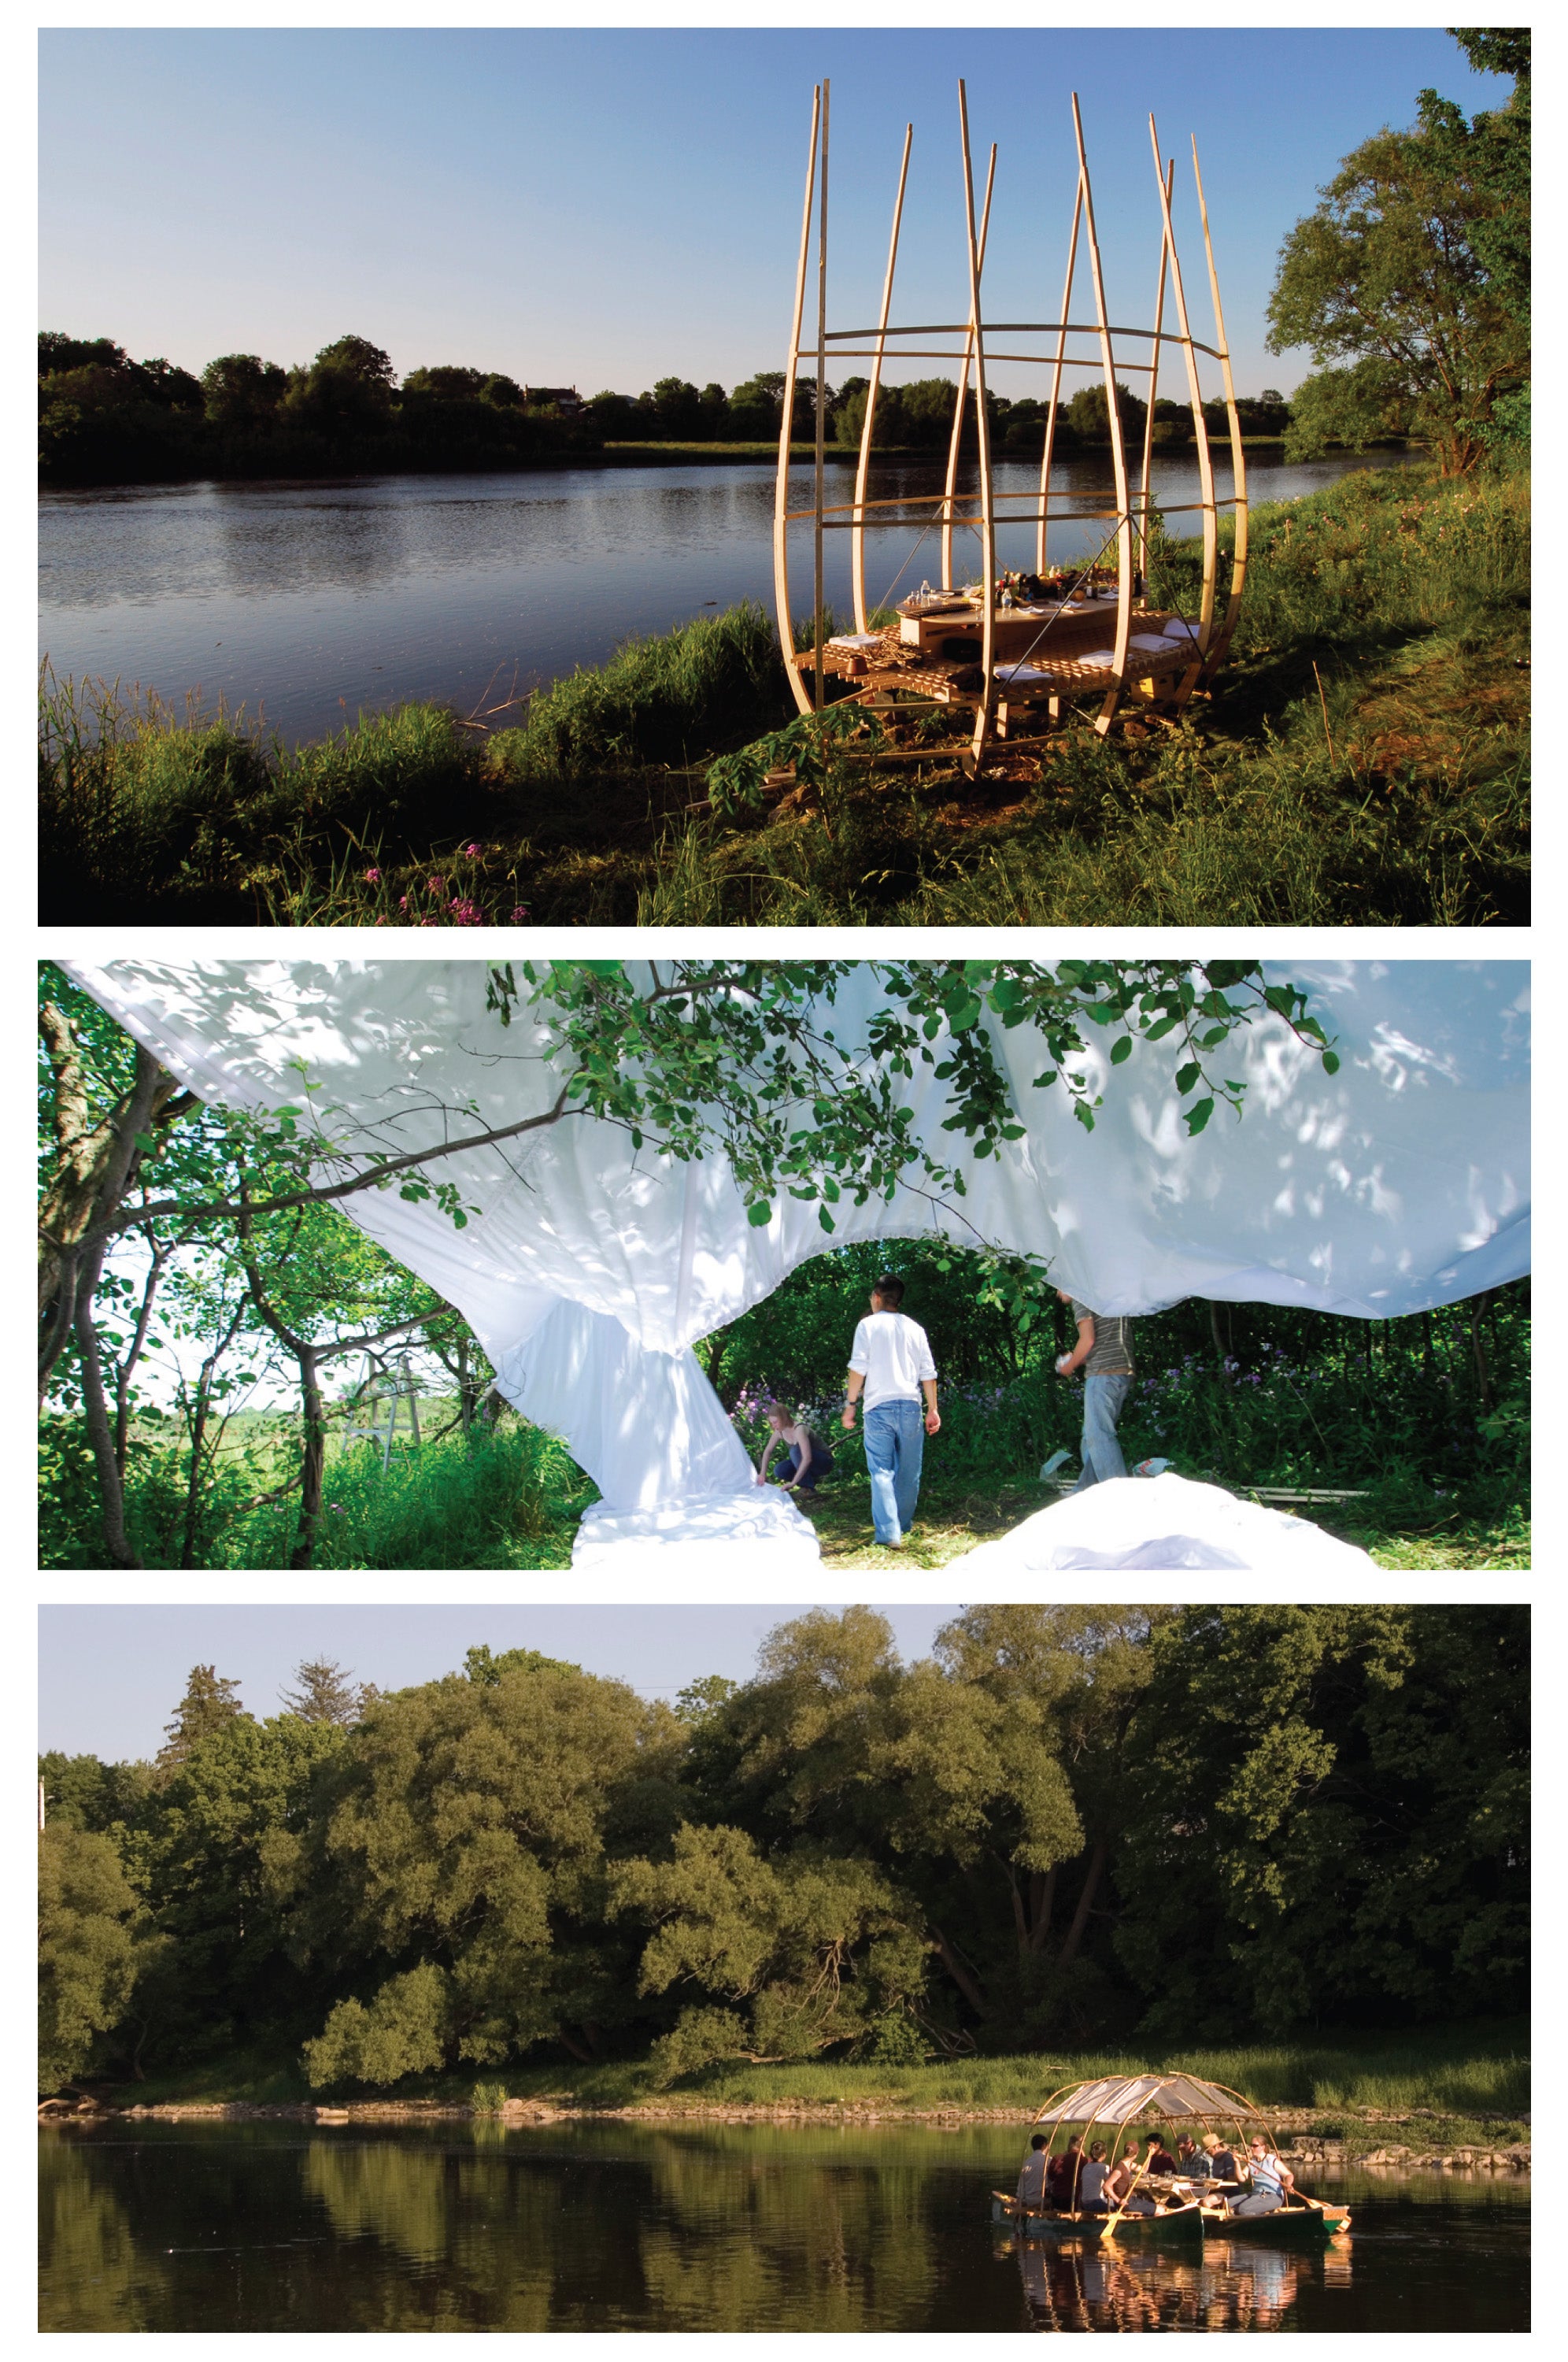 Several photographs of this student design and built floating picnic boat structure floating along a lake.